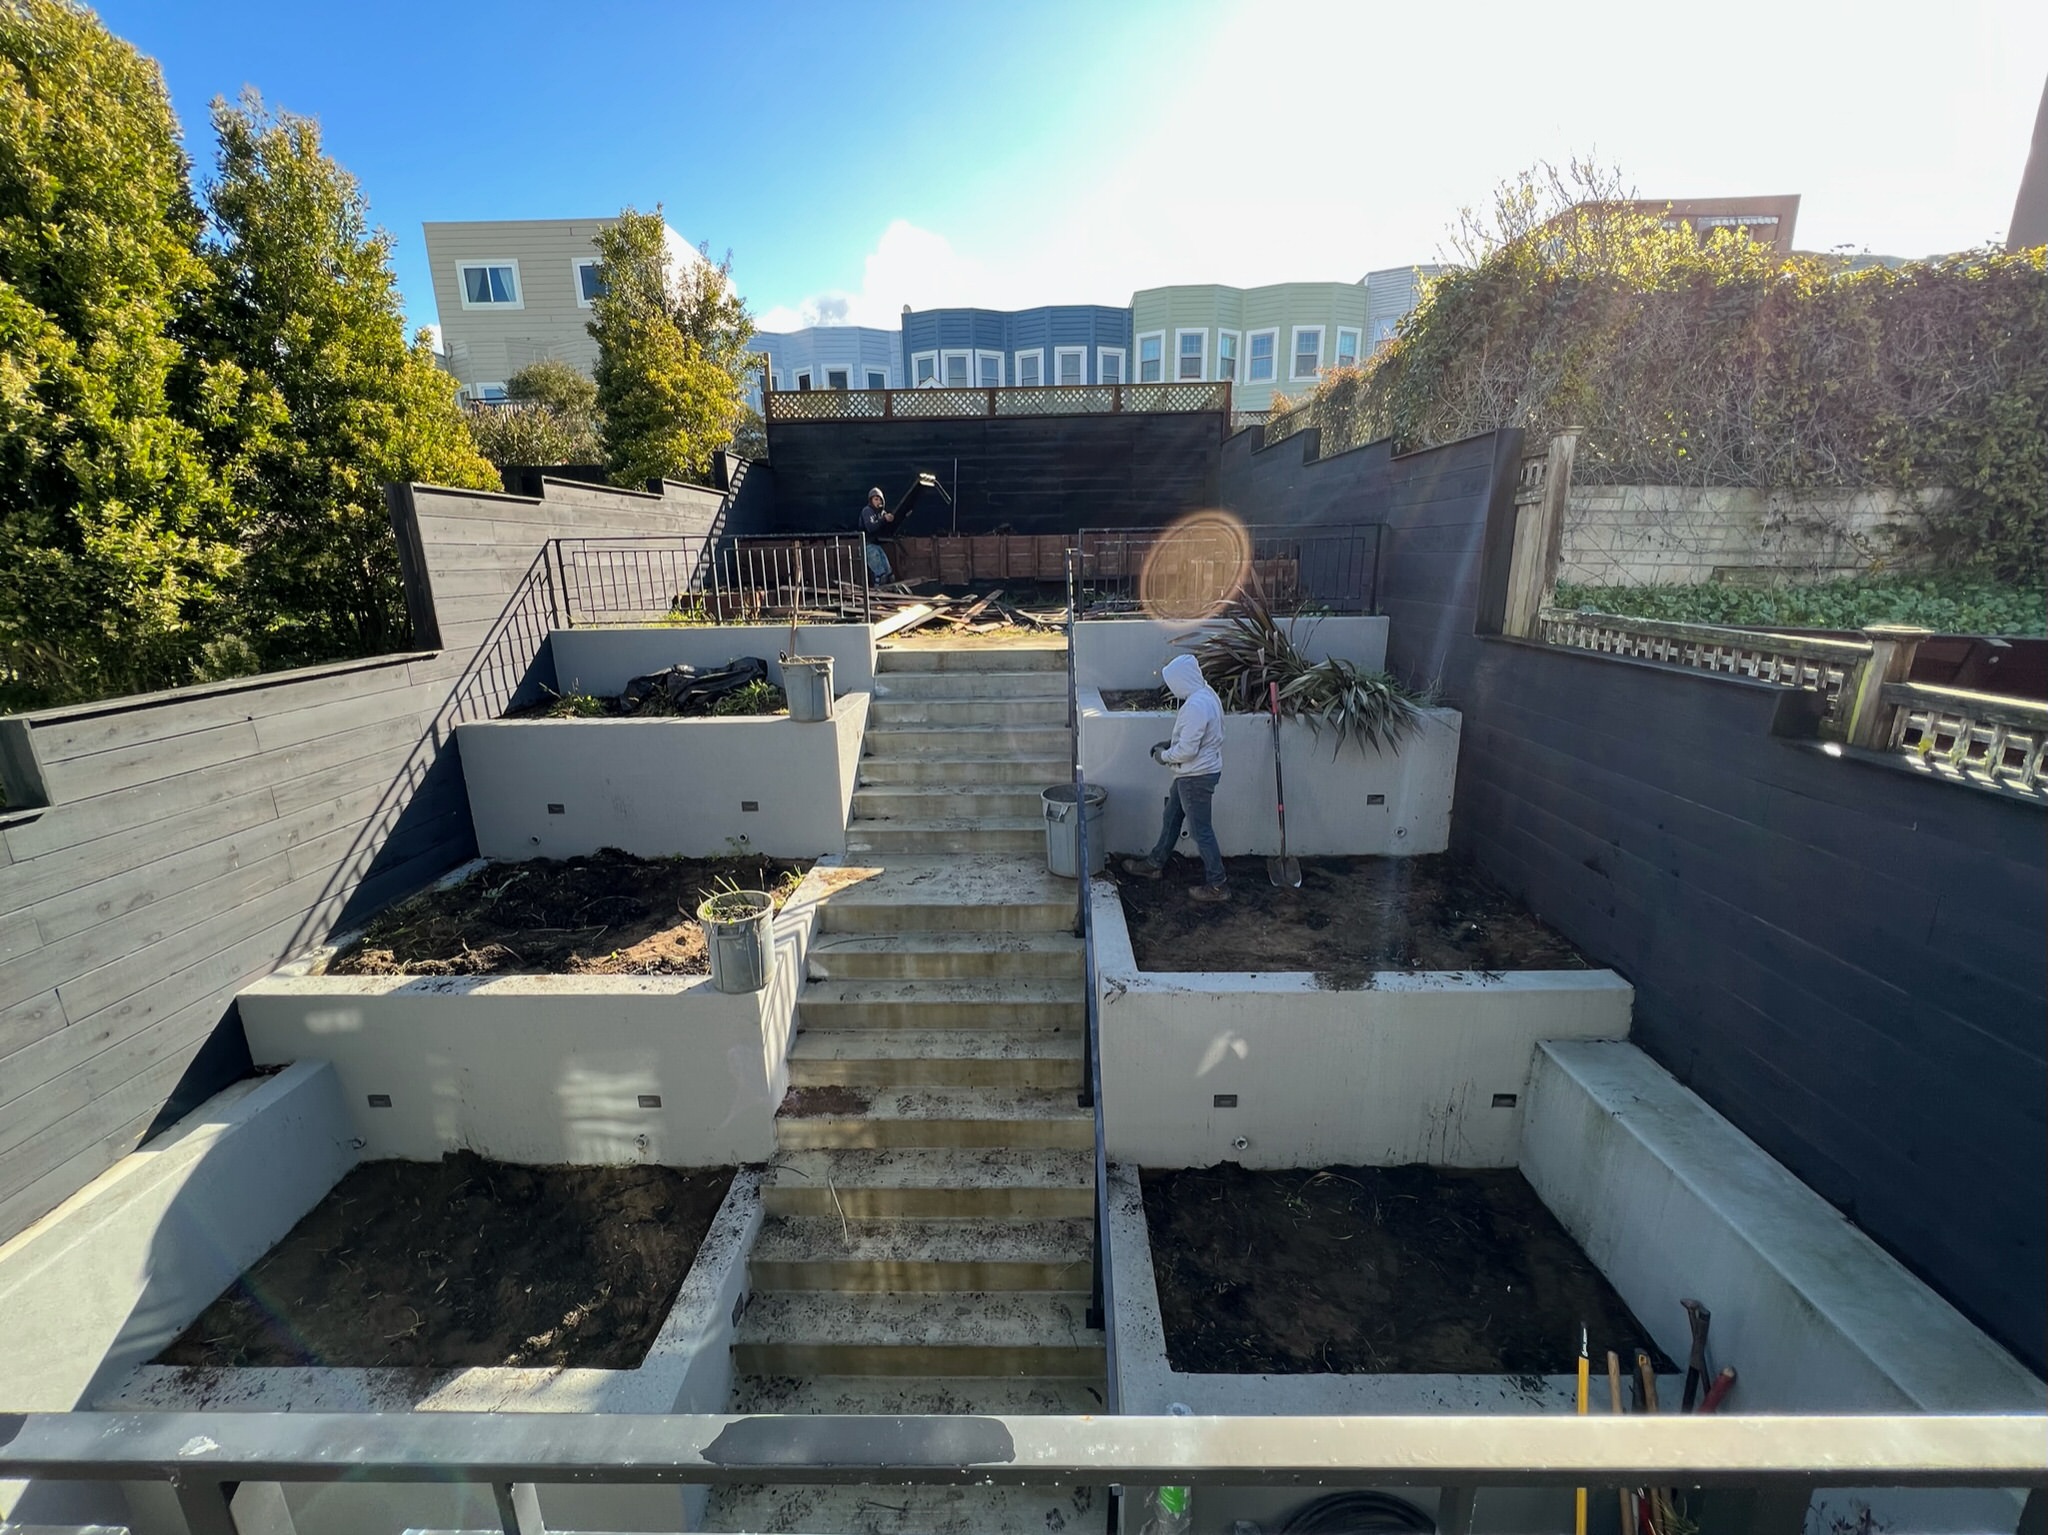 Backyard before at our Outer Sunset, San Francisco project. Three tiered retaining walls filled with dirt and some dying plants on either side of stairway leading up to top level patio. Top patio area covered with debris of wood and dirt.